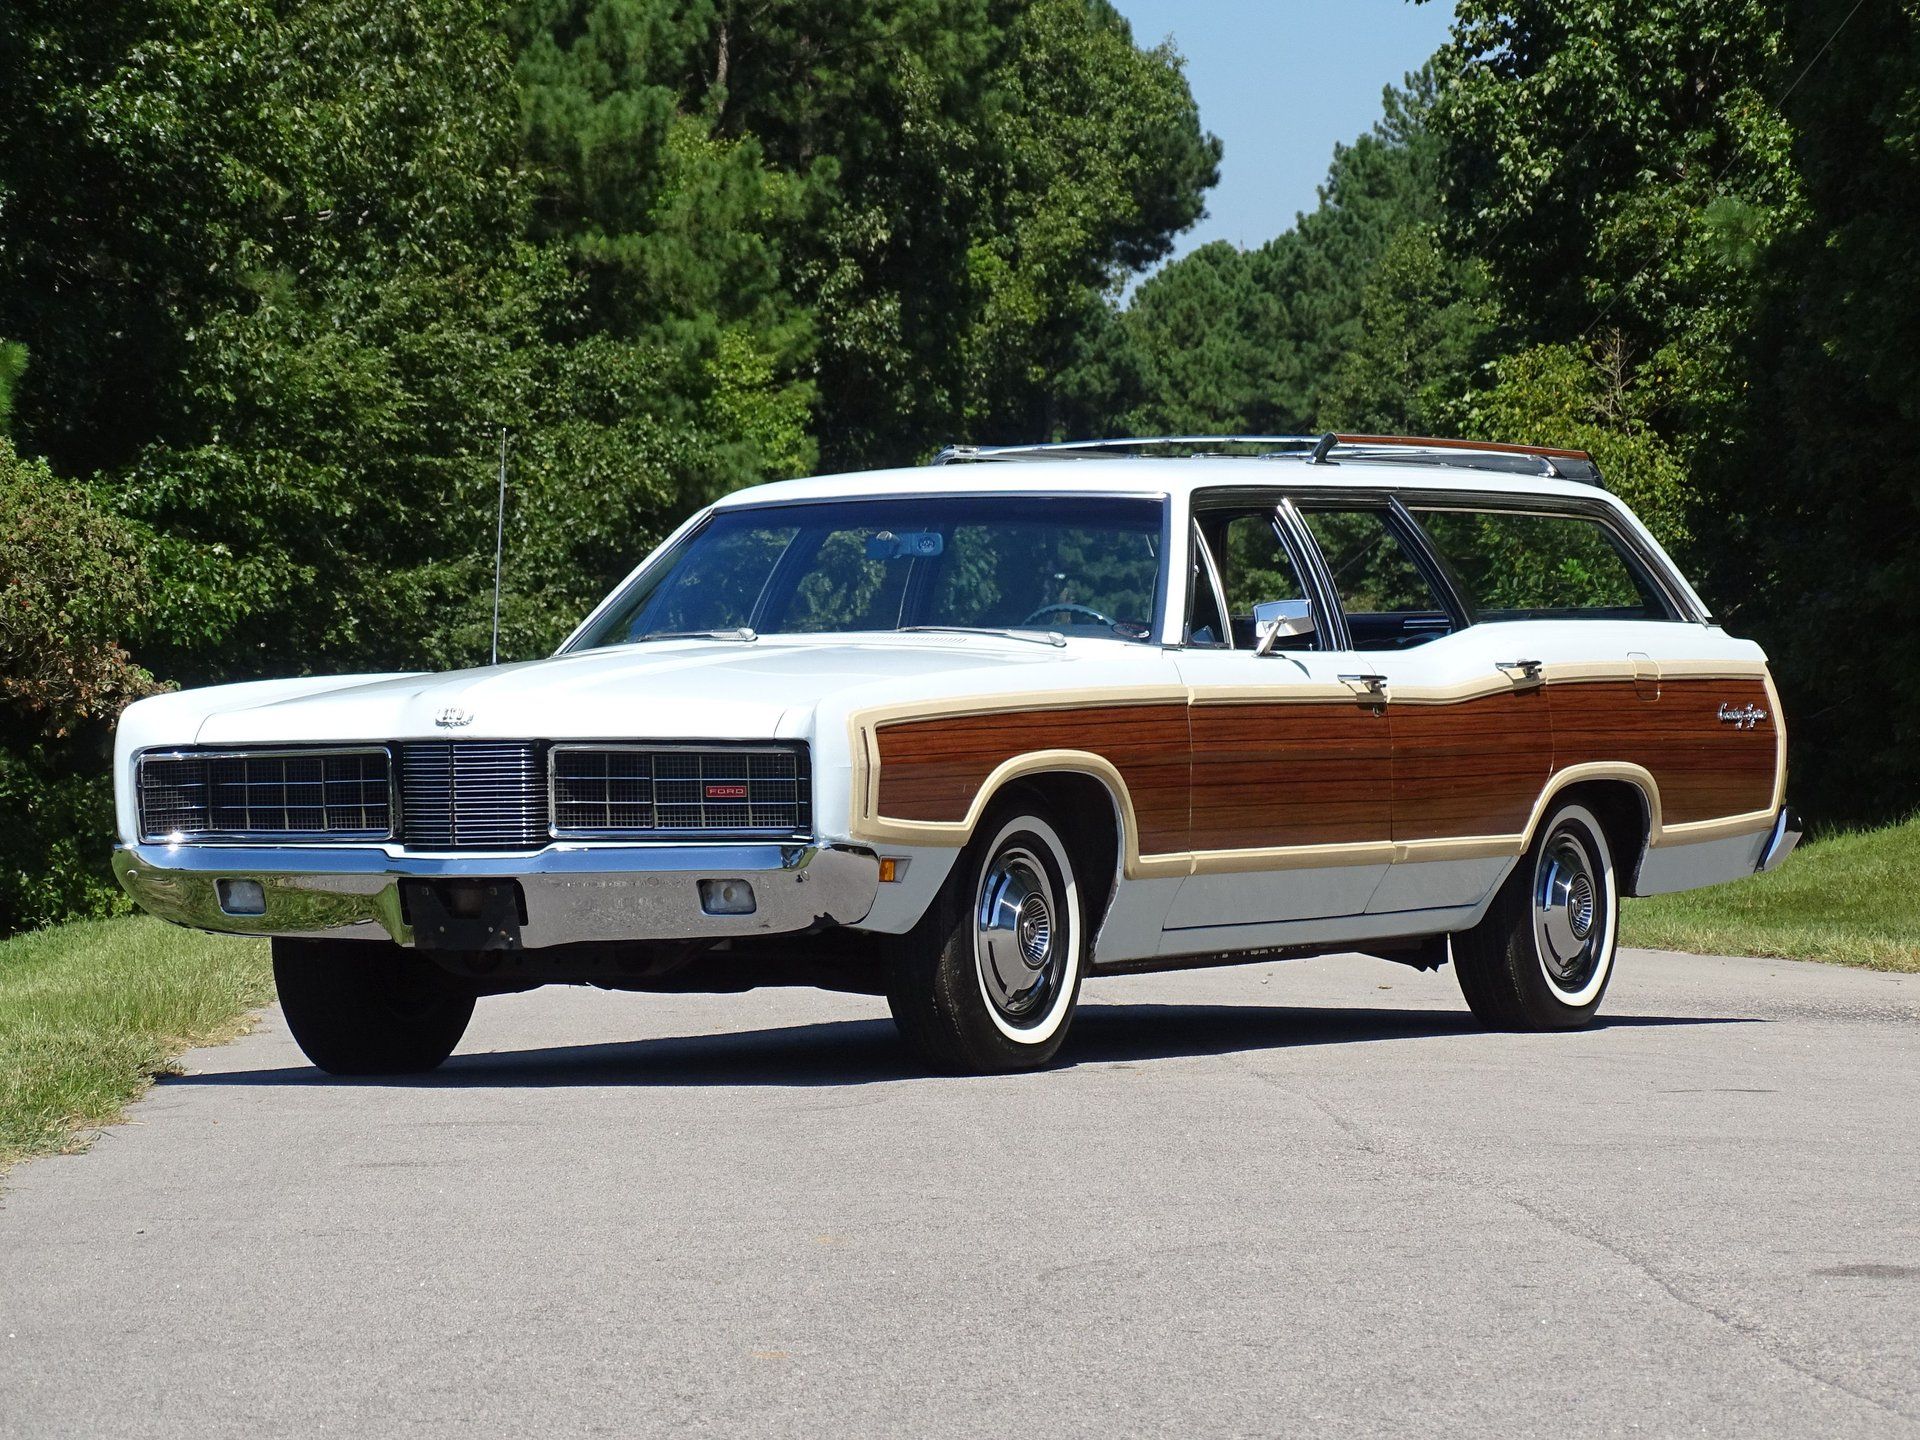 1970 Ford Country Squire Wagon To Reshape Your Road Trips 